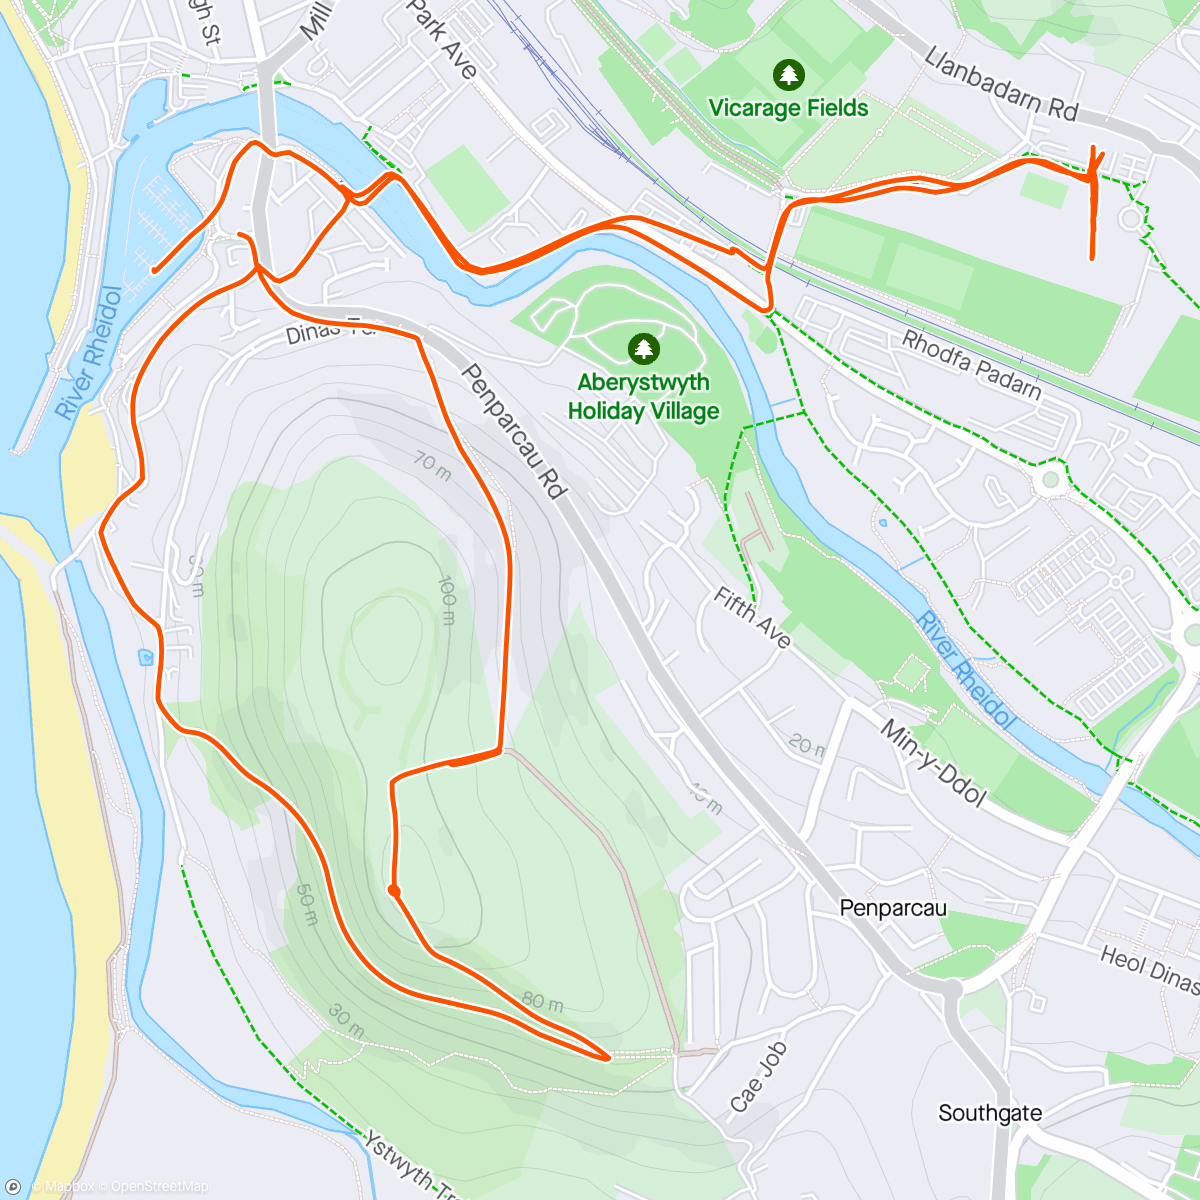 Mapa de la actividad, Club session including warm up (run up pen Dinas!)
Then short hill efforts by the horse field.
Pleased with the progression.